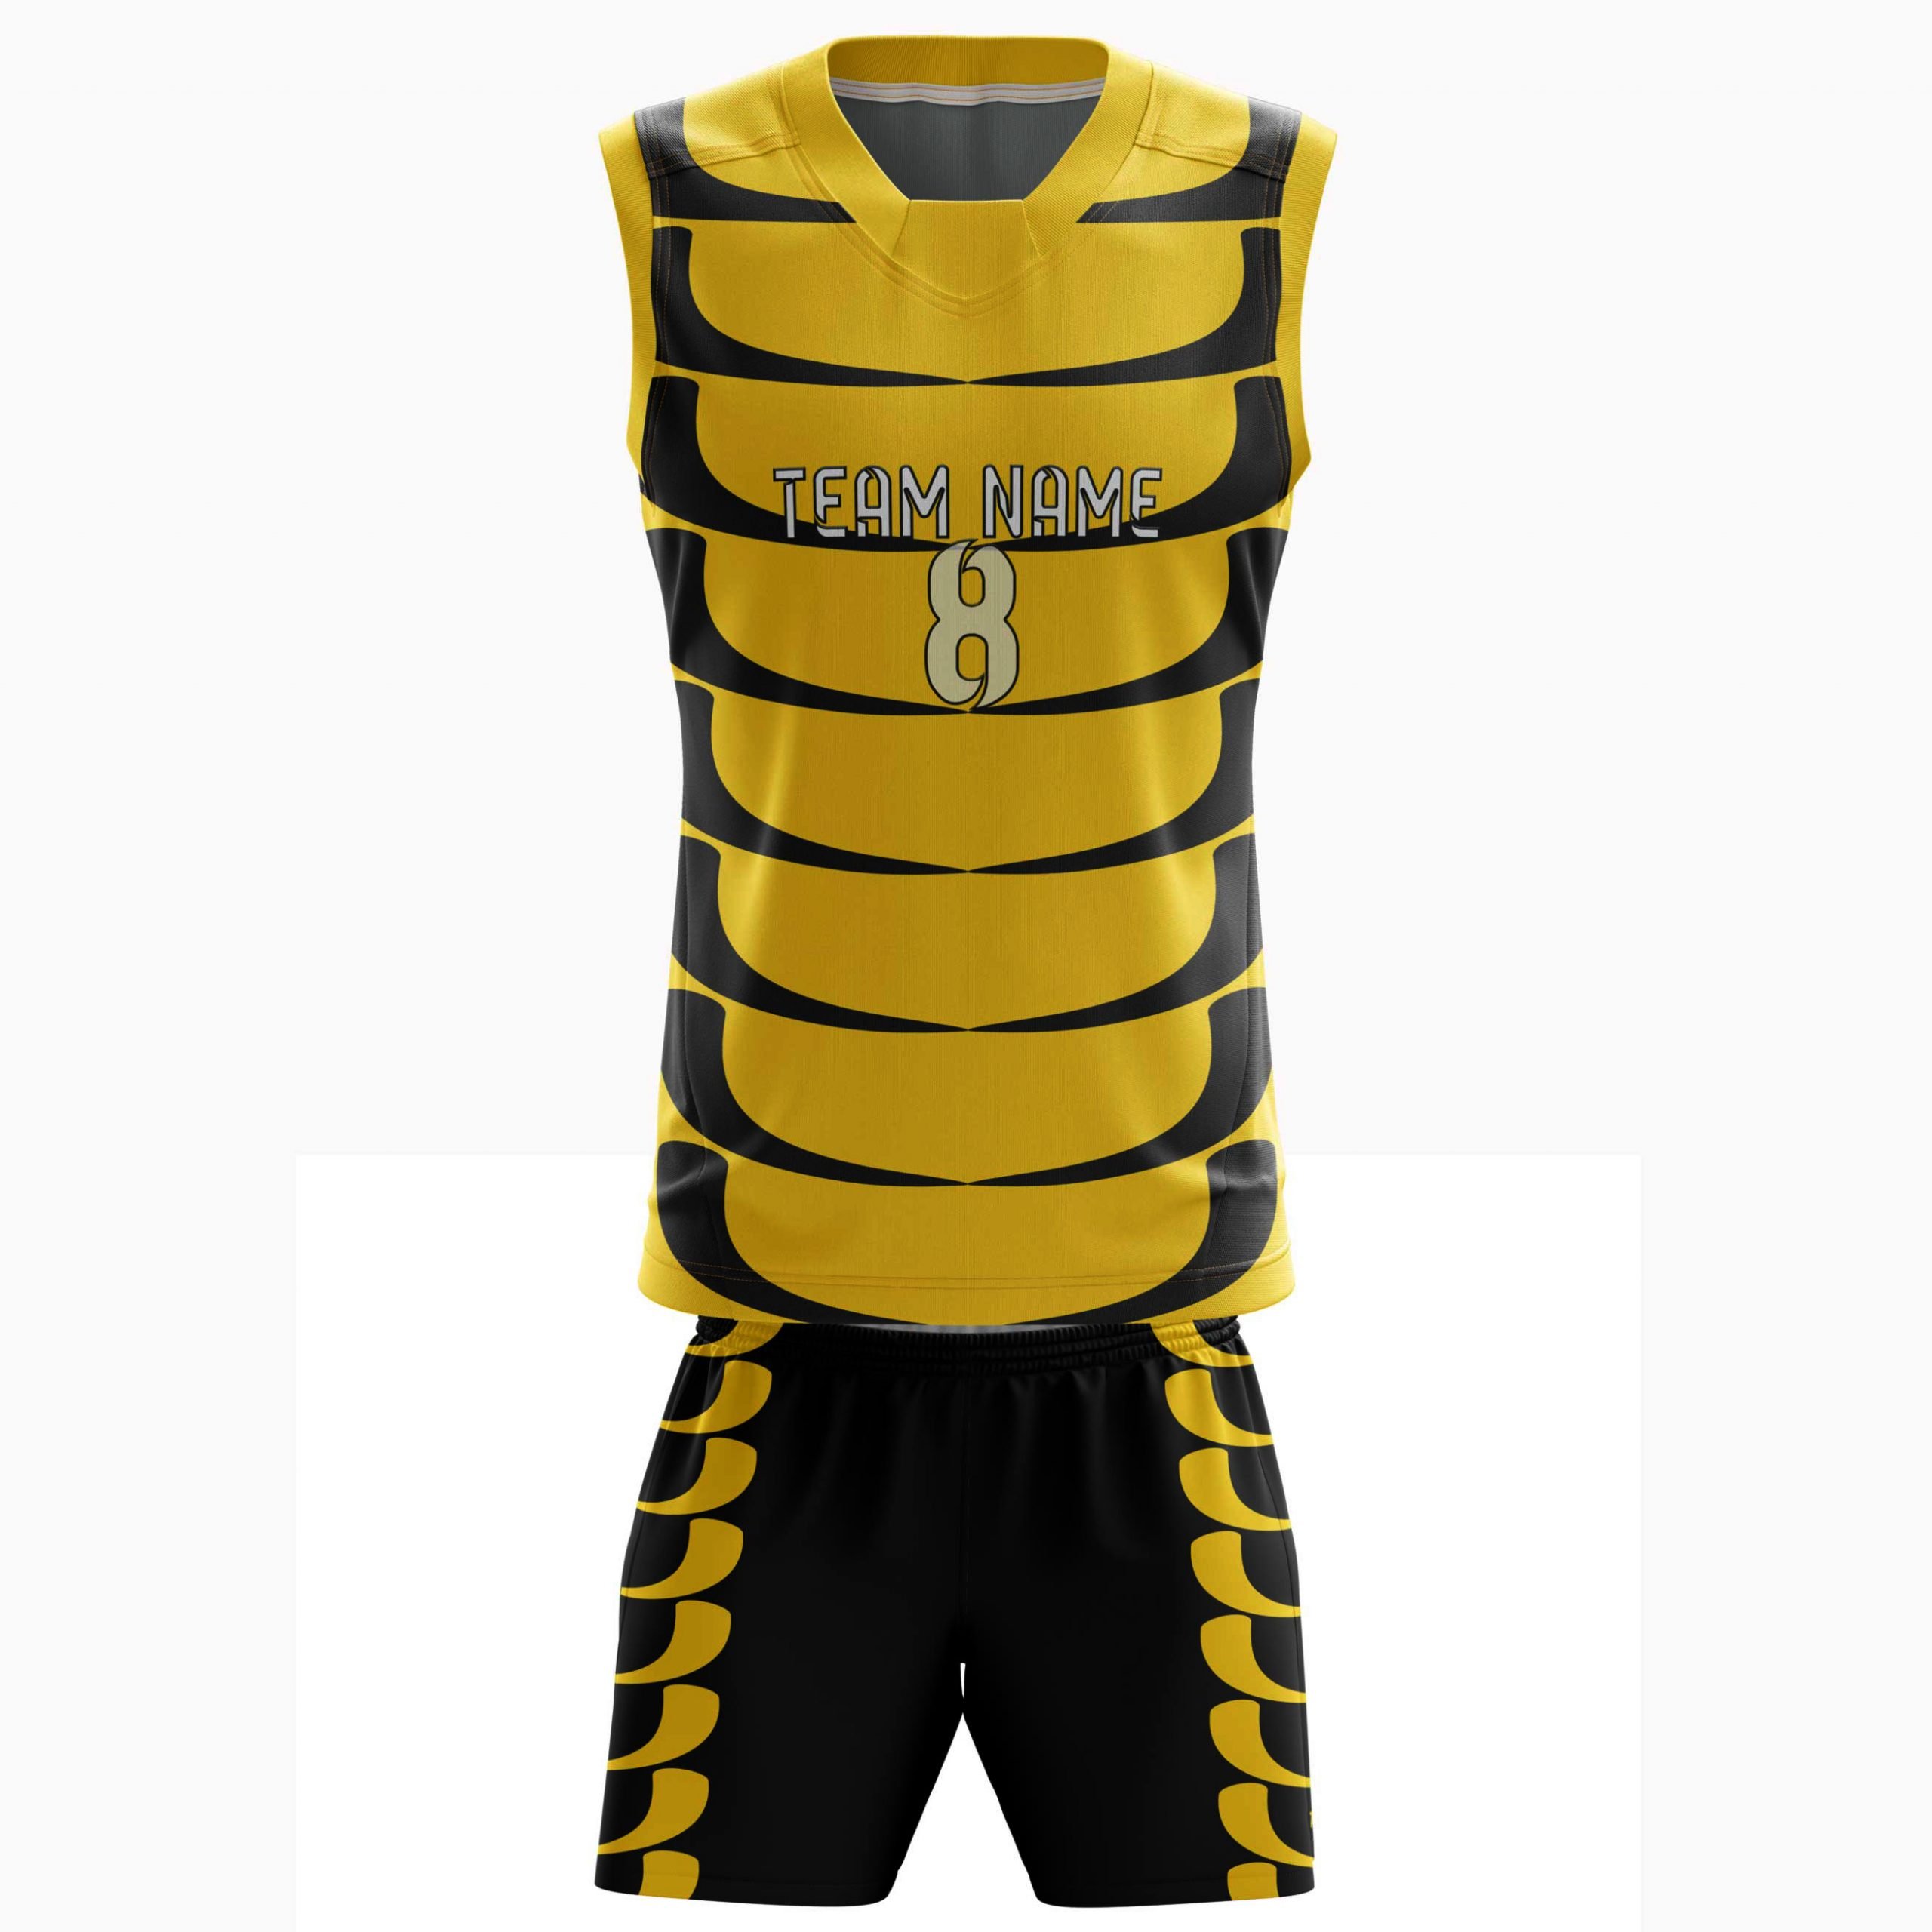 Wholesale 2022-2023 sublimated material men's custom basketball uniform set latest  basketball jersey From m.